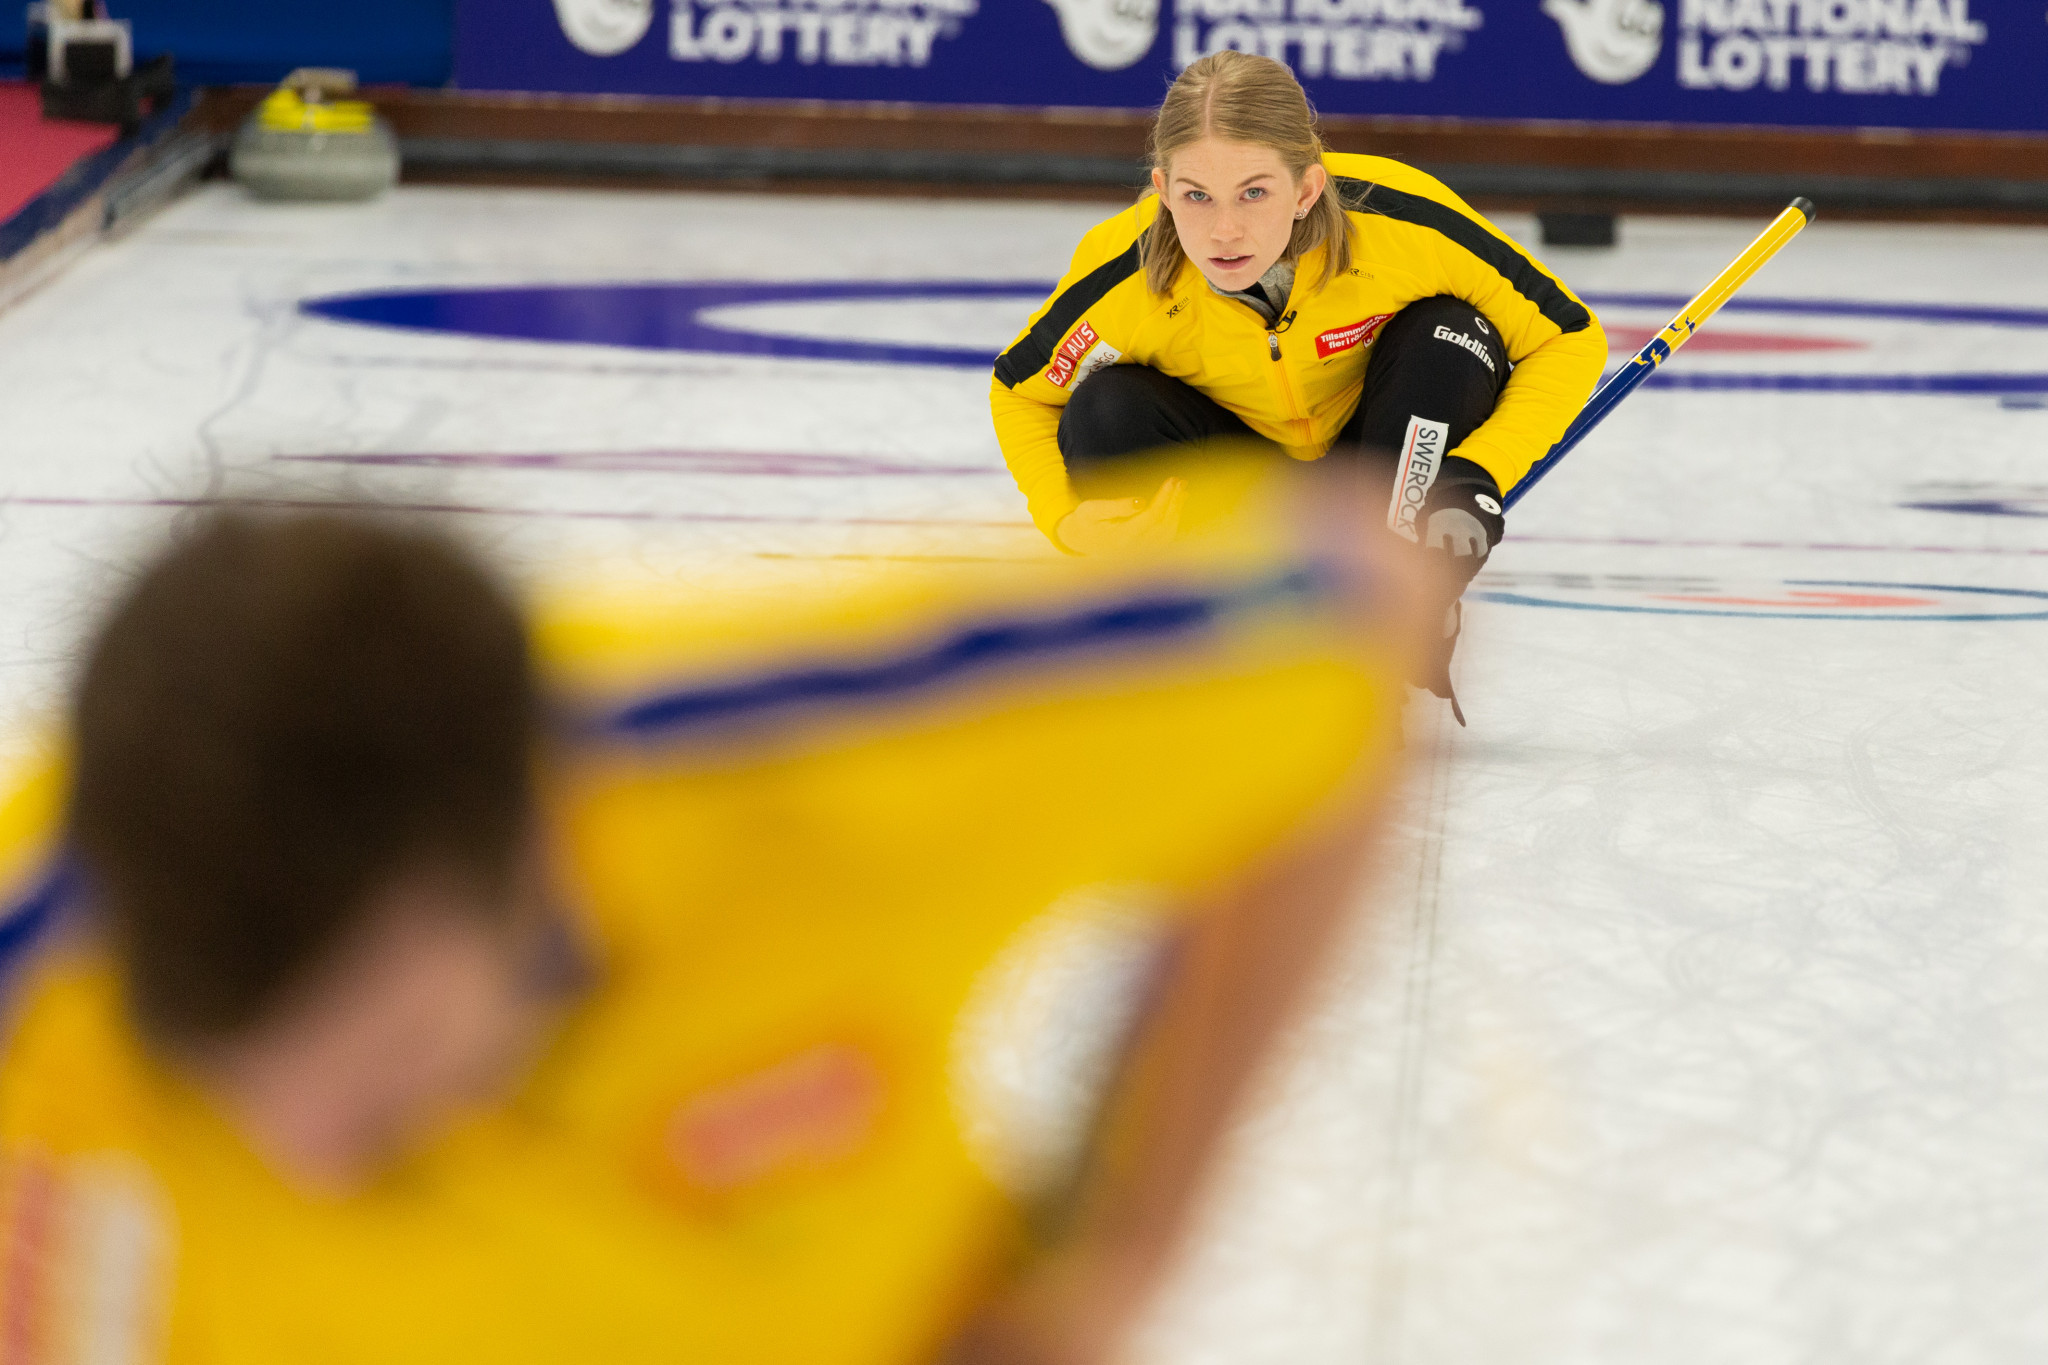 Swedes and Scots make winning starts at World Mixed Doubles Curling Championship